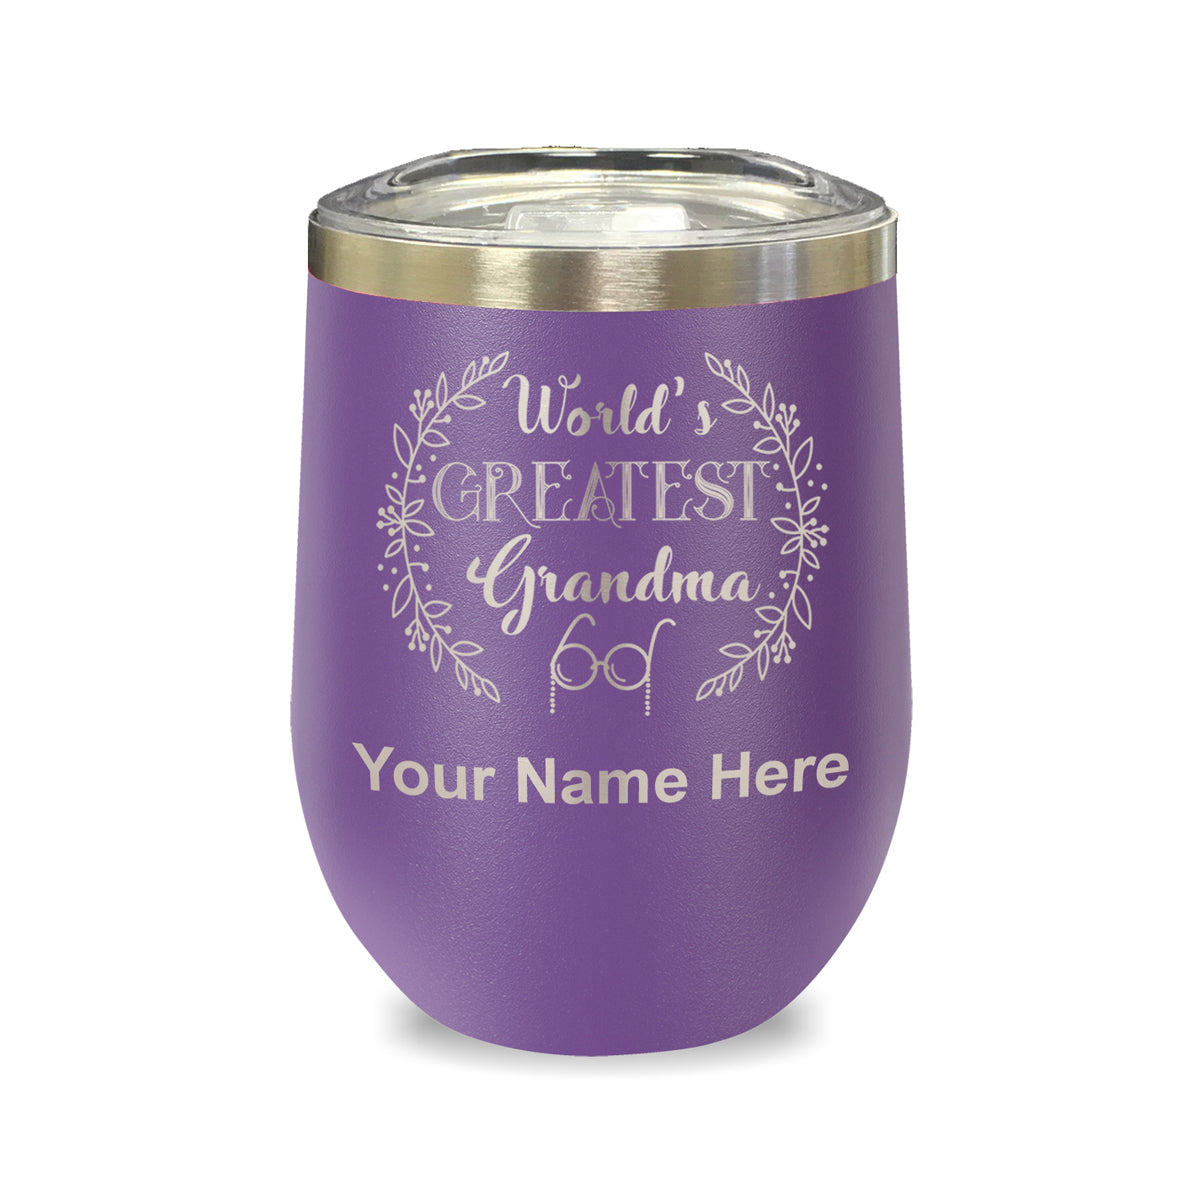 LaserGram Double Wall Stainless Steel Wine Glass, World's Greatest Grandma, Personalized Engraving Included